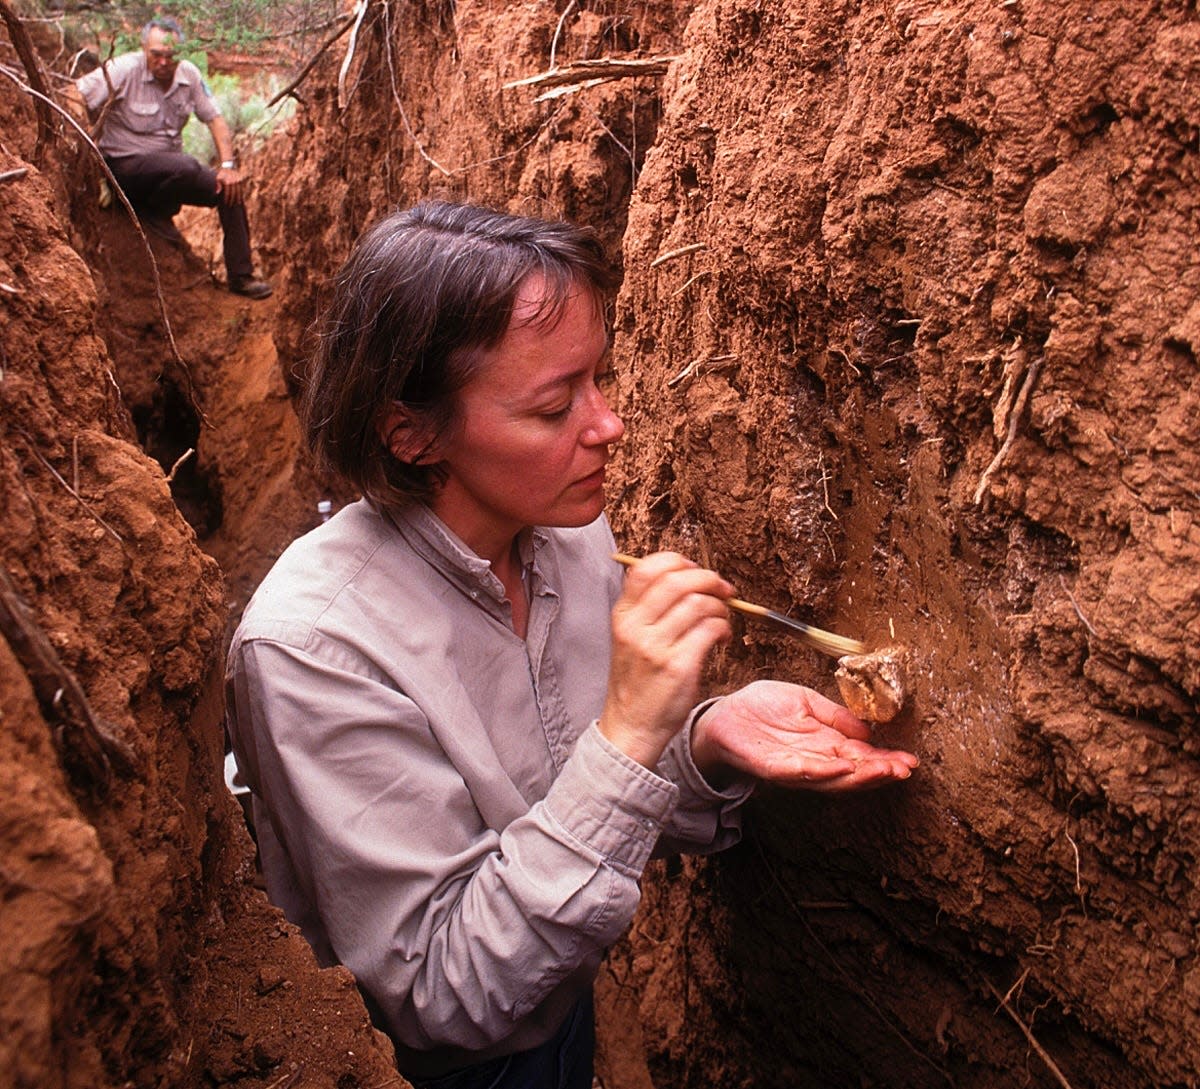 Archaeologist Margaret Howard digging out a bison bone in Caprock Canyons State Park in 1996 before it opened. Howard helped pioneer the concept of surveying parklands for relics and remains before roads and buildings are designed or constructed, thus protecting artifacts but also saving money.